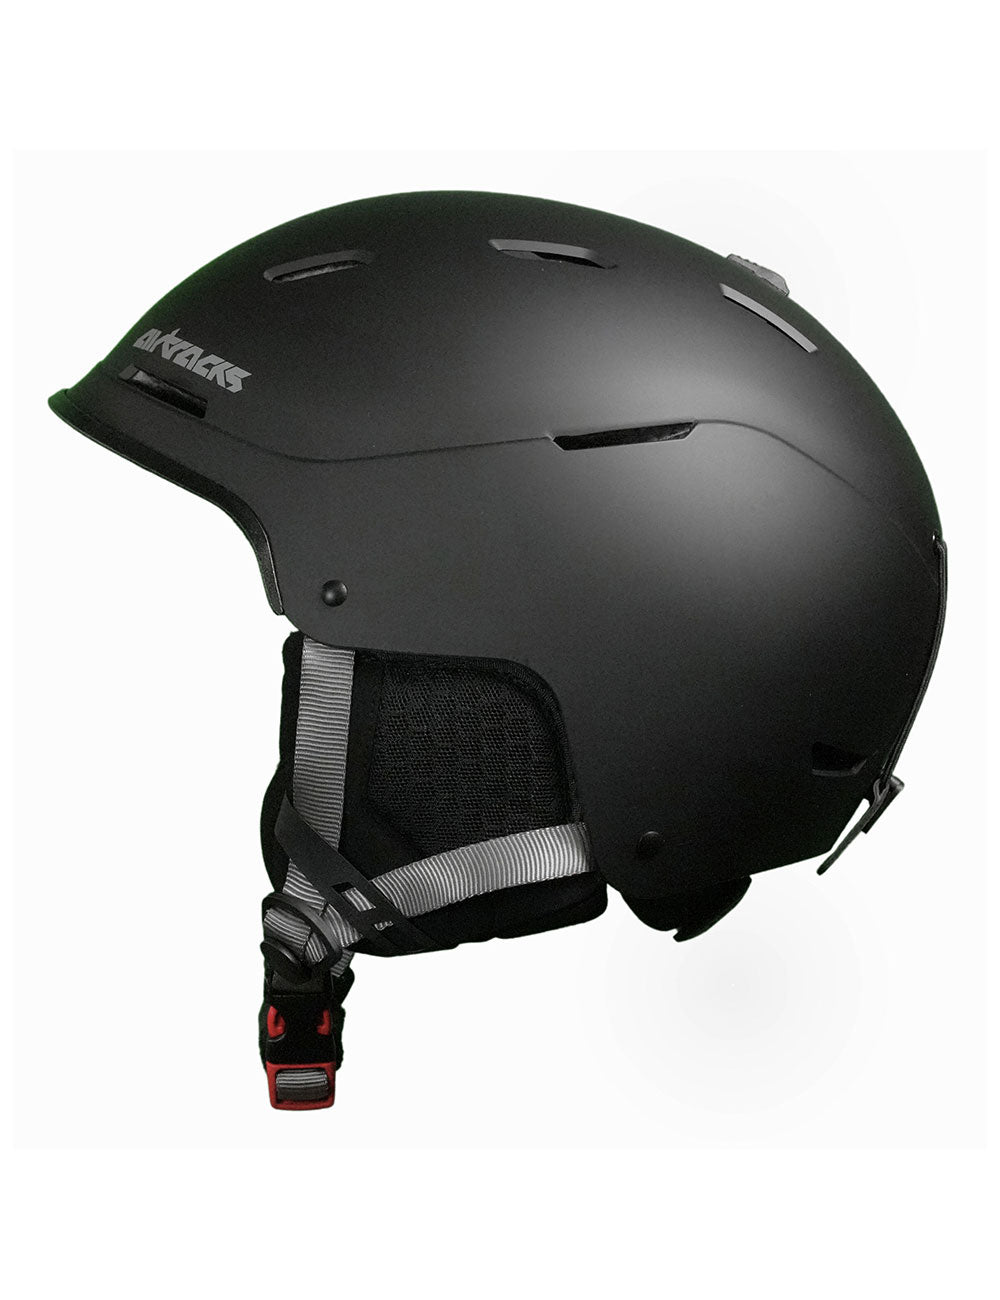 Strong_SB_Helm_sps2101_1300_1